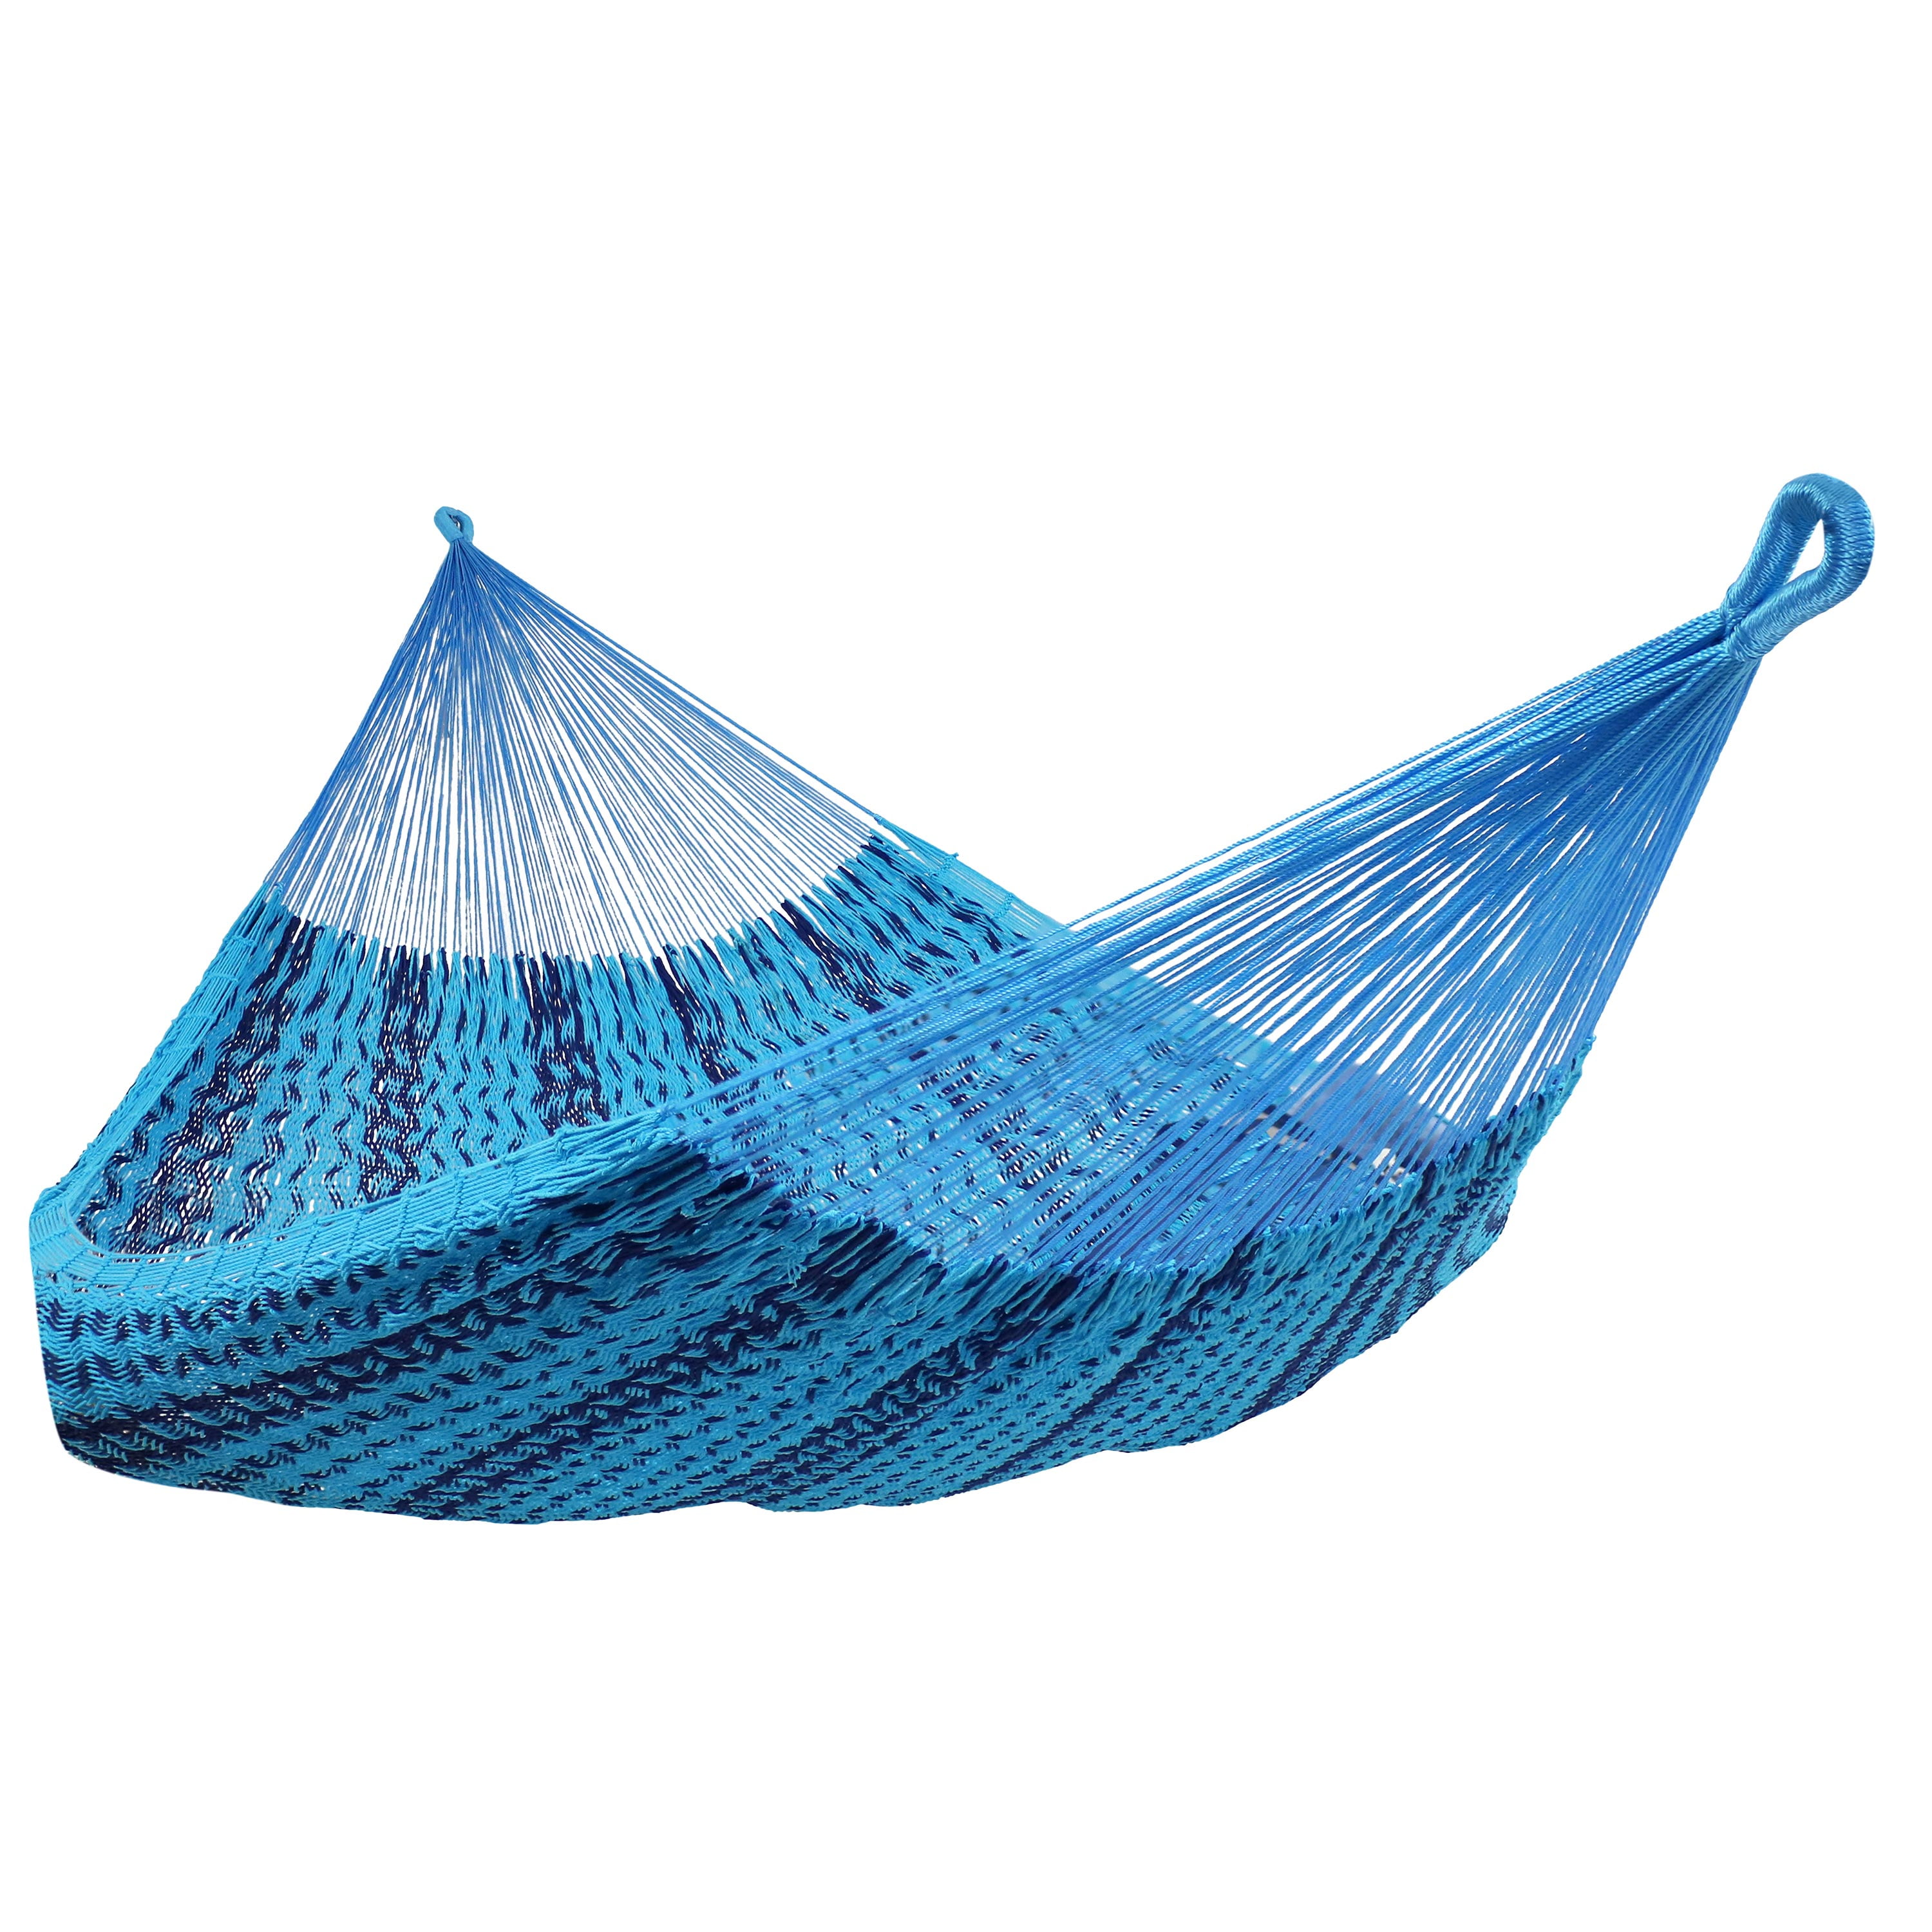 Sunnydaze Heavy-Duty Handwoven XXL Mayan Family Hammock with Thick Cord -  880 lb Weight Capacity - Blue